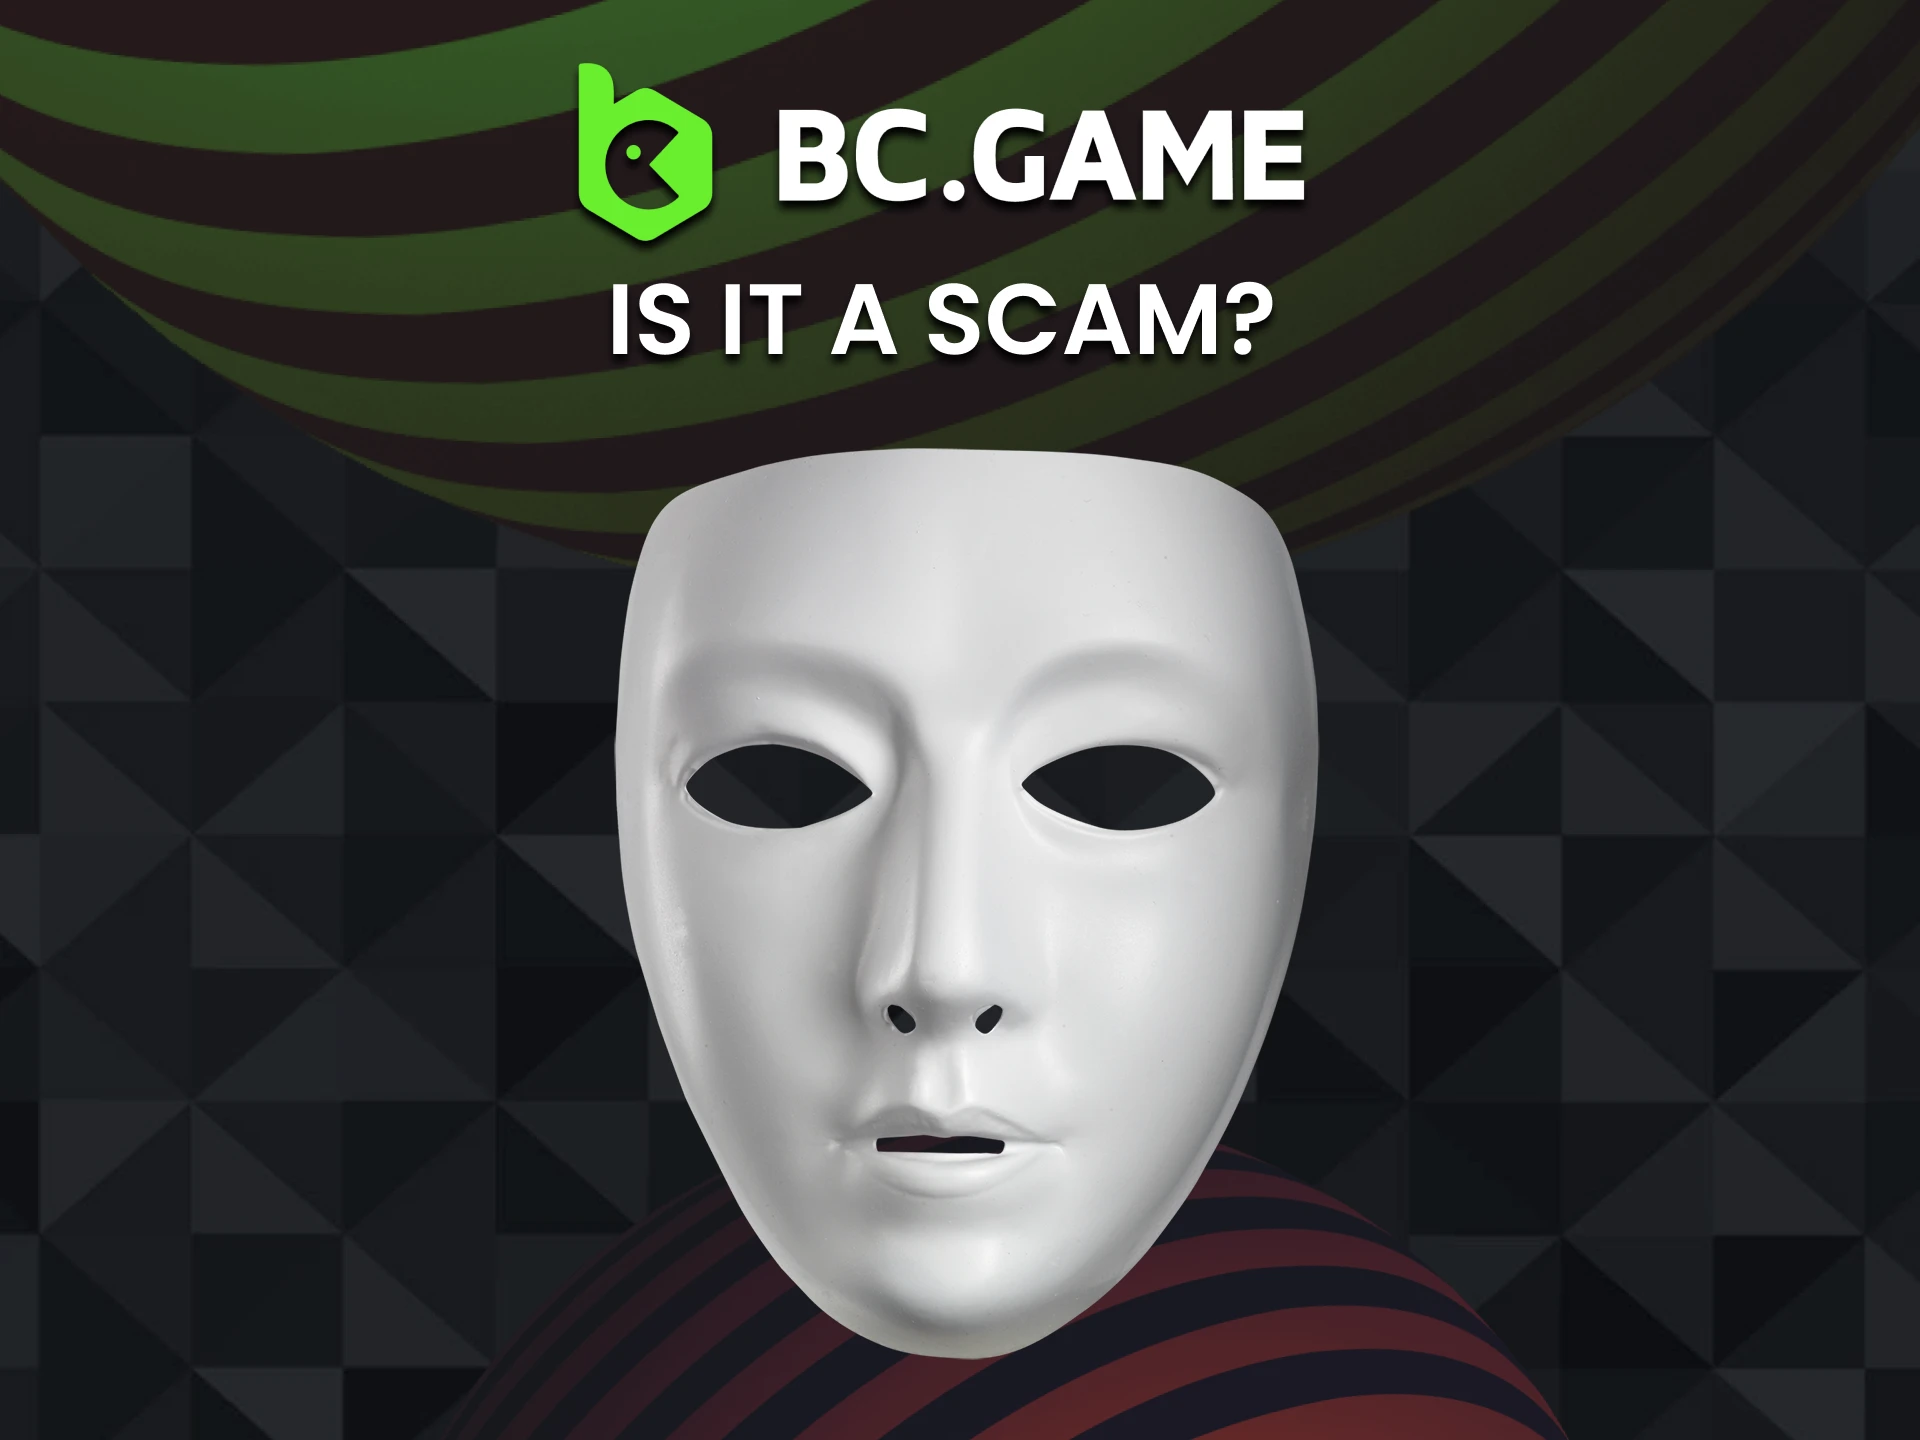 The BCGame site is not a scam.